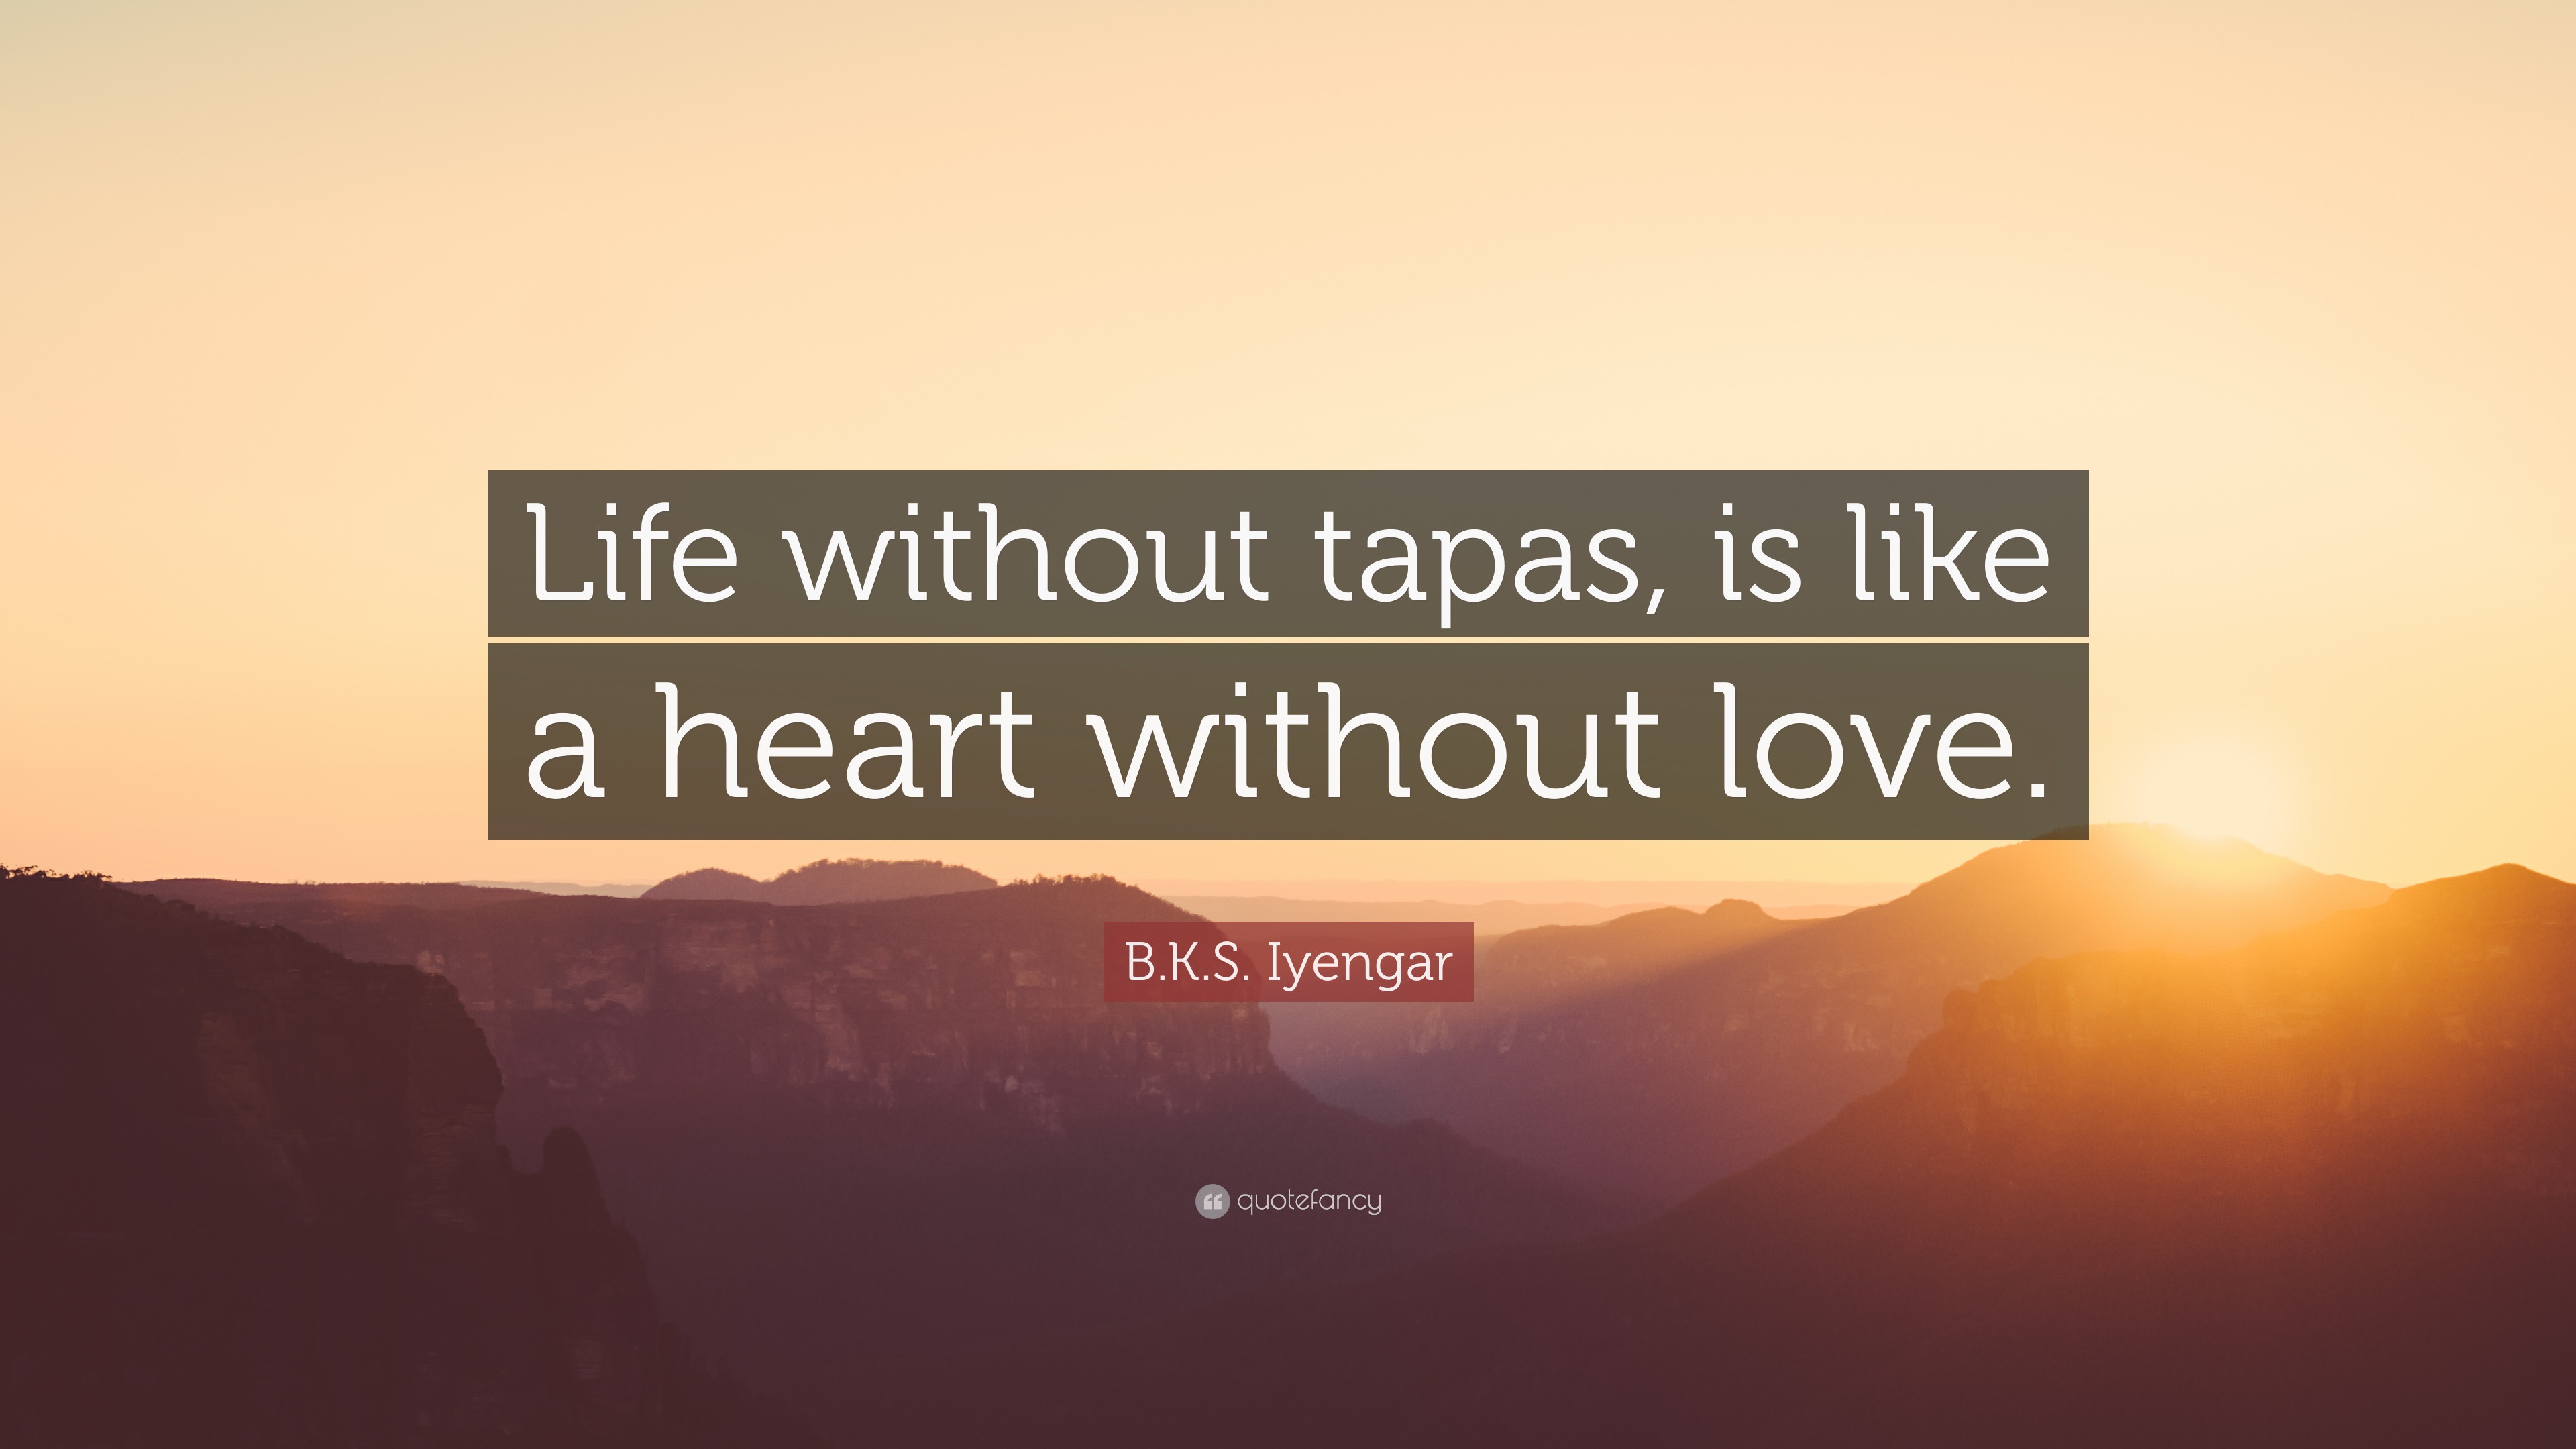 B K S Iyengar Quote Life without tapas is like a heart without love